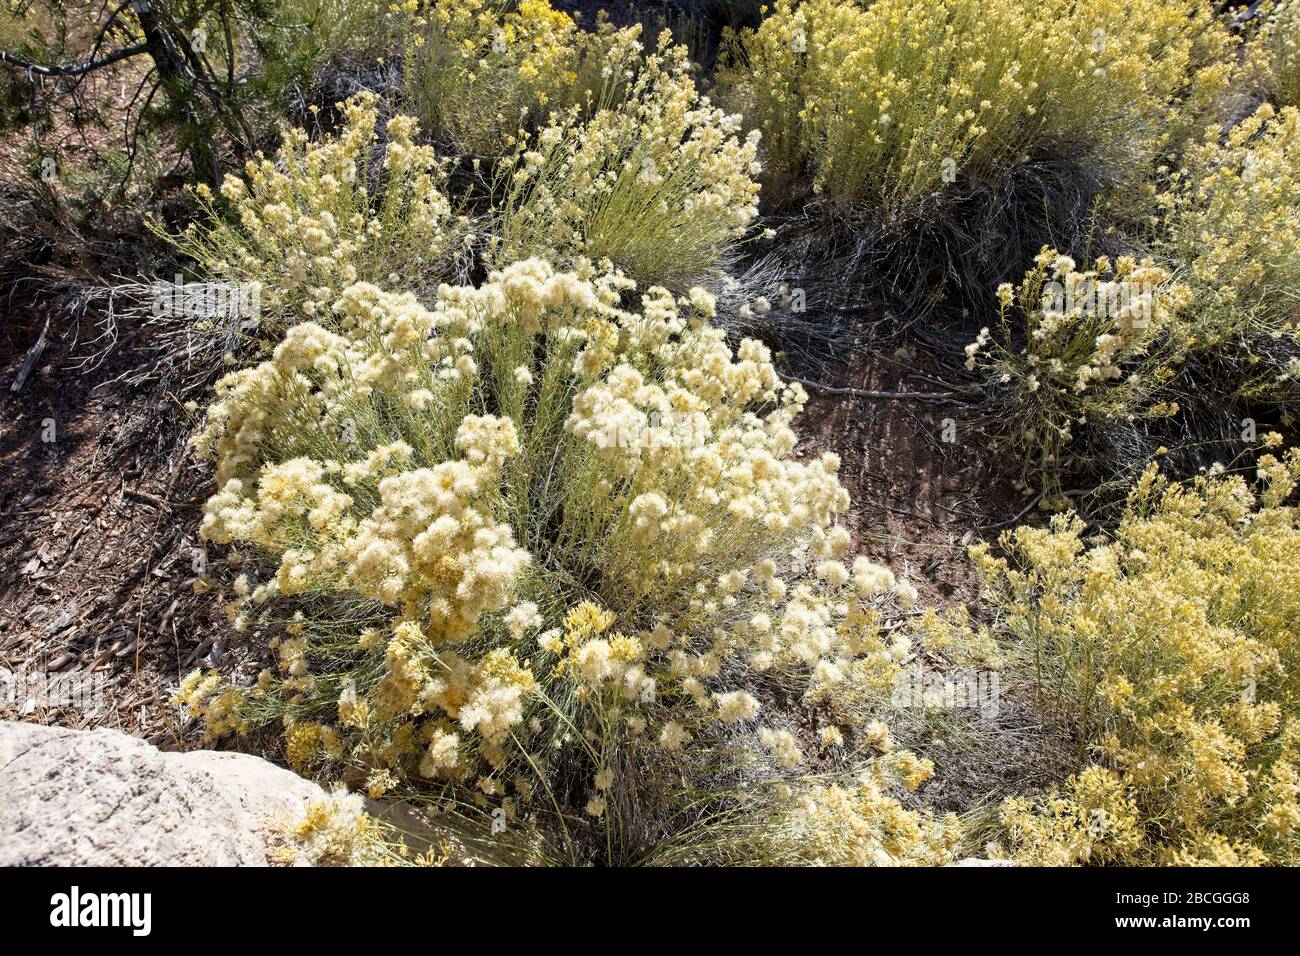 A view of sprawling rabbitbrush shrub which is native in the west location is the Grand Canyon National Park in Arizona Stock Photo